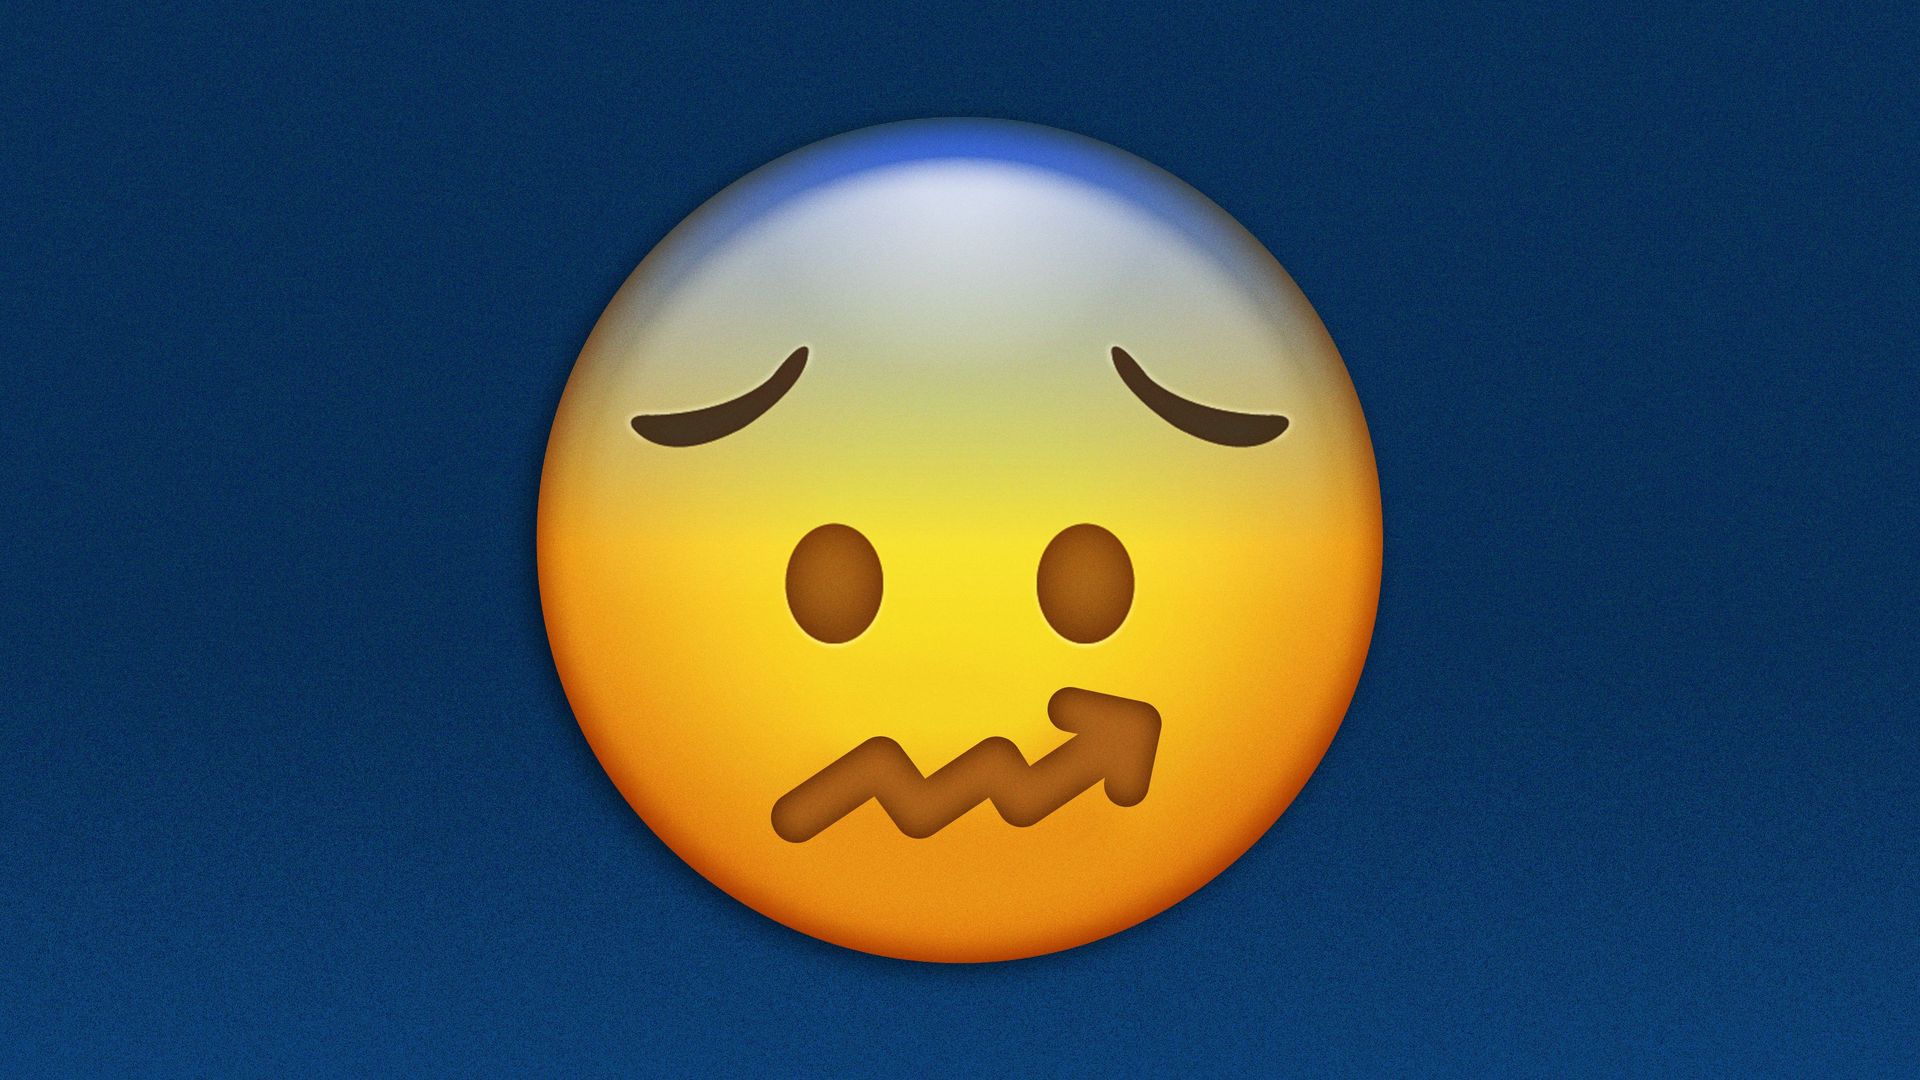 Illustration of a worried emoji with an upward trend line as the mouth. 